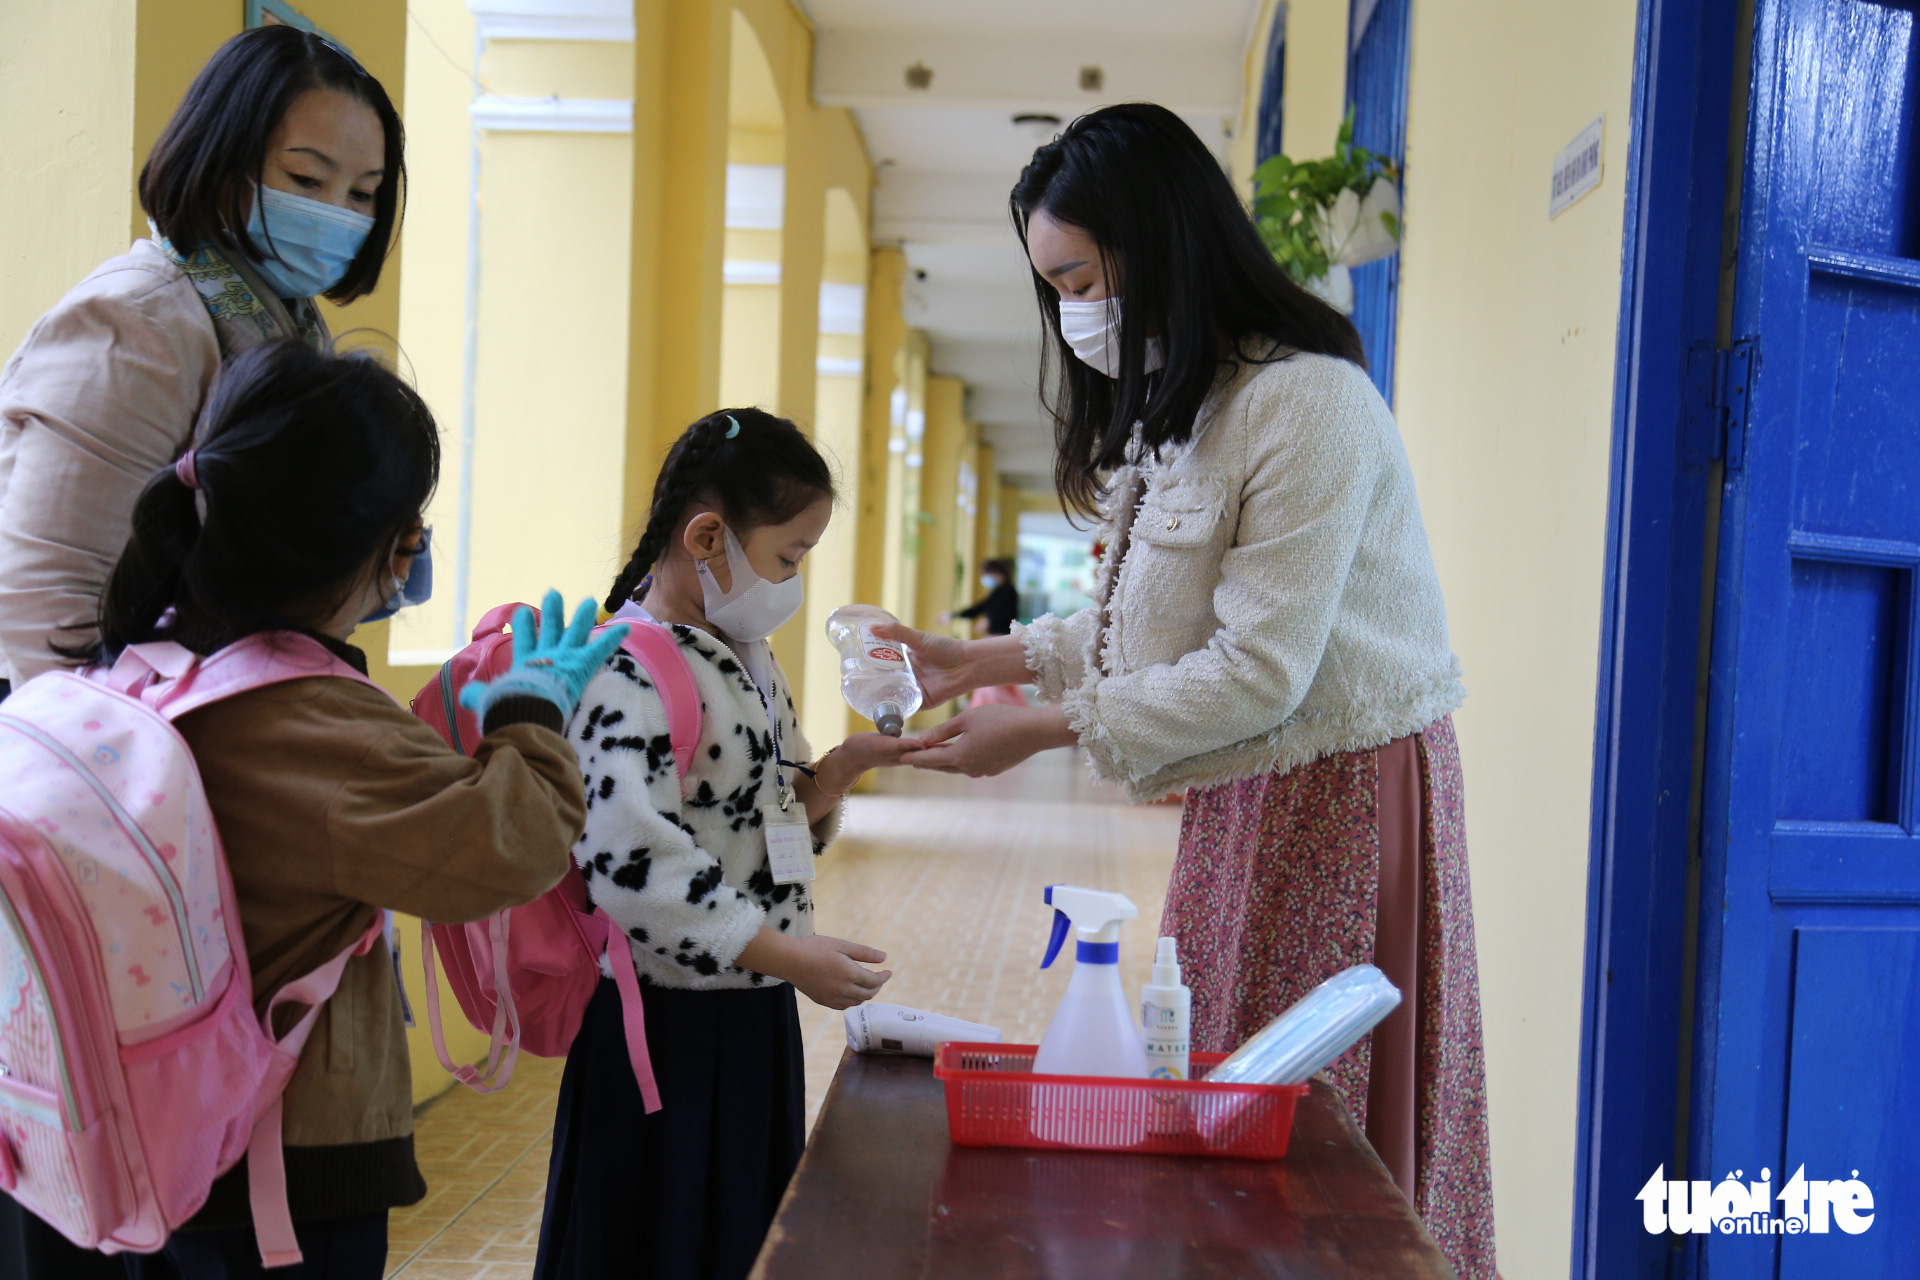 A teacher helps first graders use hand sanitizer at Phu Dong Elementary School in Hai Chau District, Da Nang City, December 6, 2021. Photo: Tuoi Tre